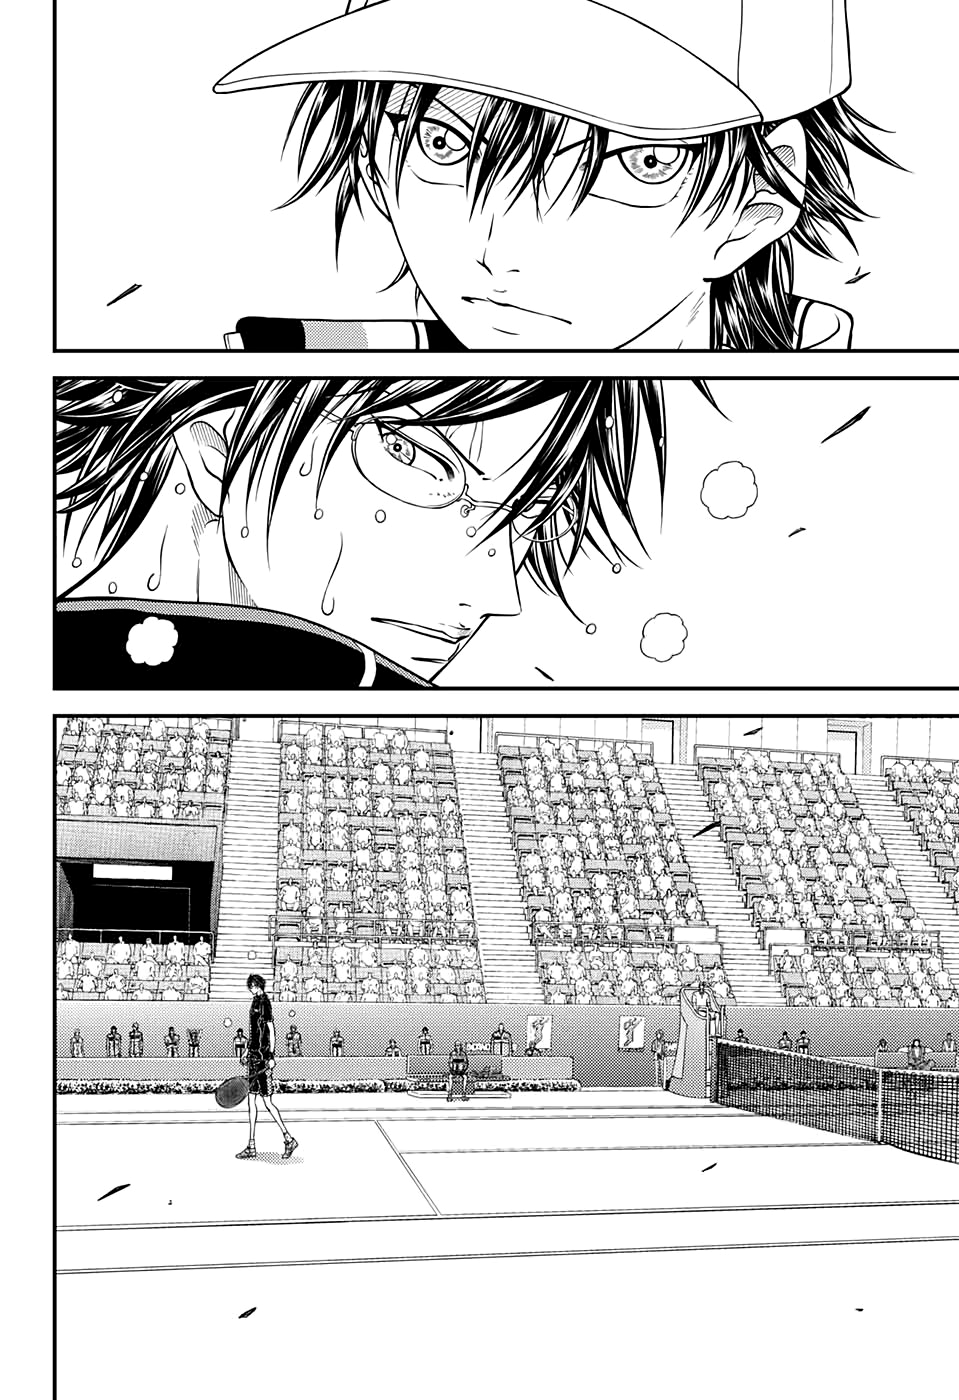 New Prince Of Tennis Vol.32 Chapter 314: Golden Age 314 Wordless Support - Picture 3